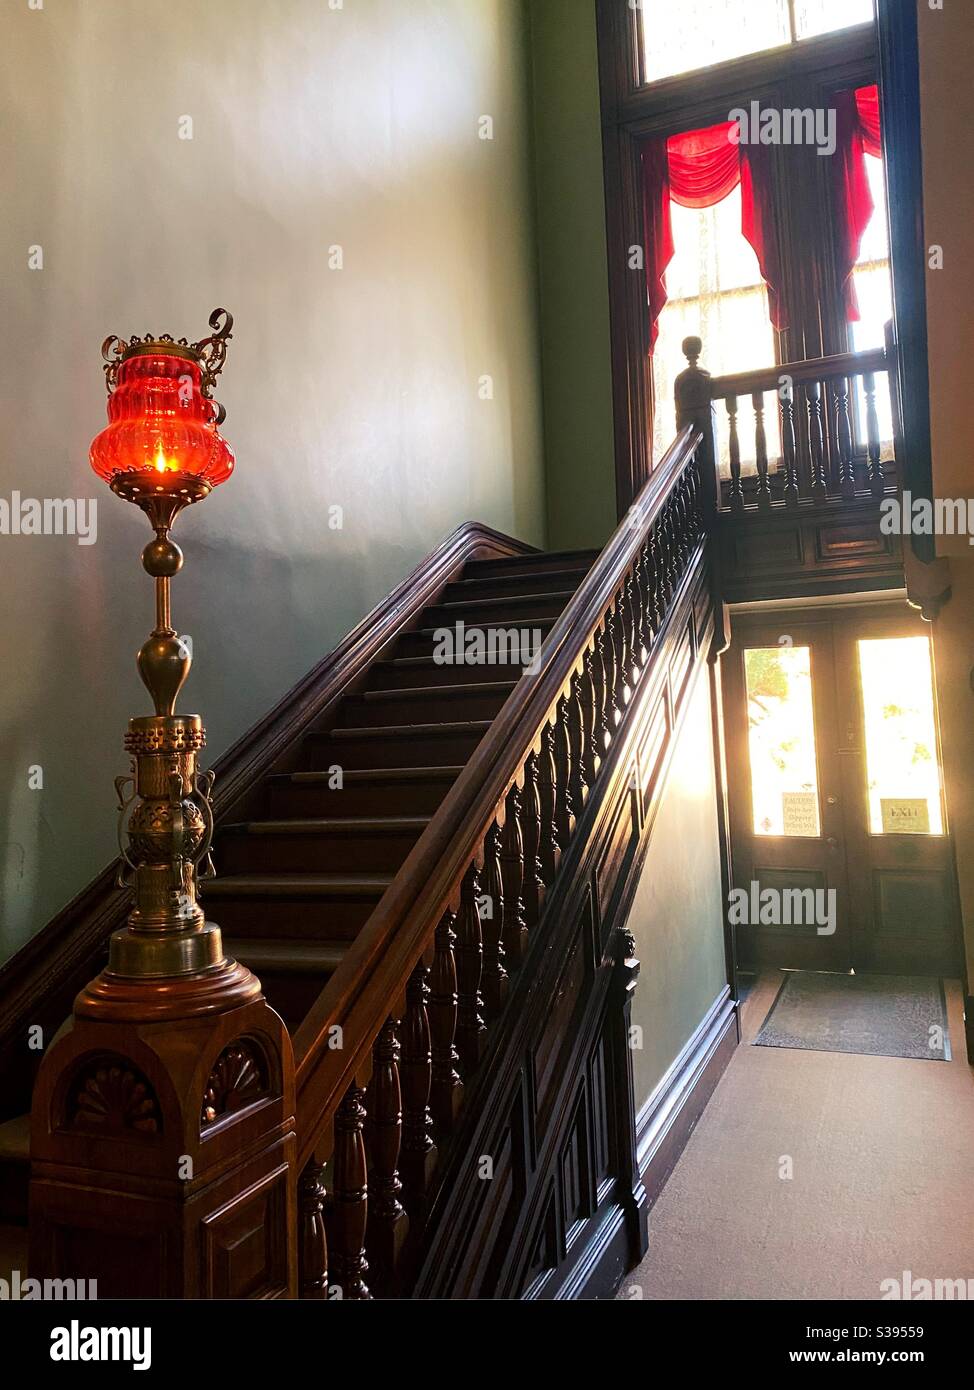 A glass lamp on the newel post of a banister in a Queen Anne style house. Stock Photo